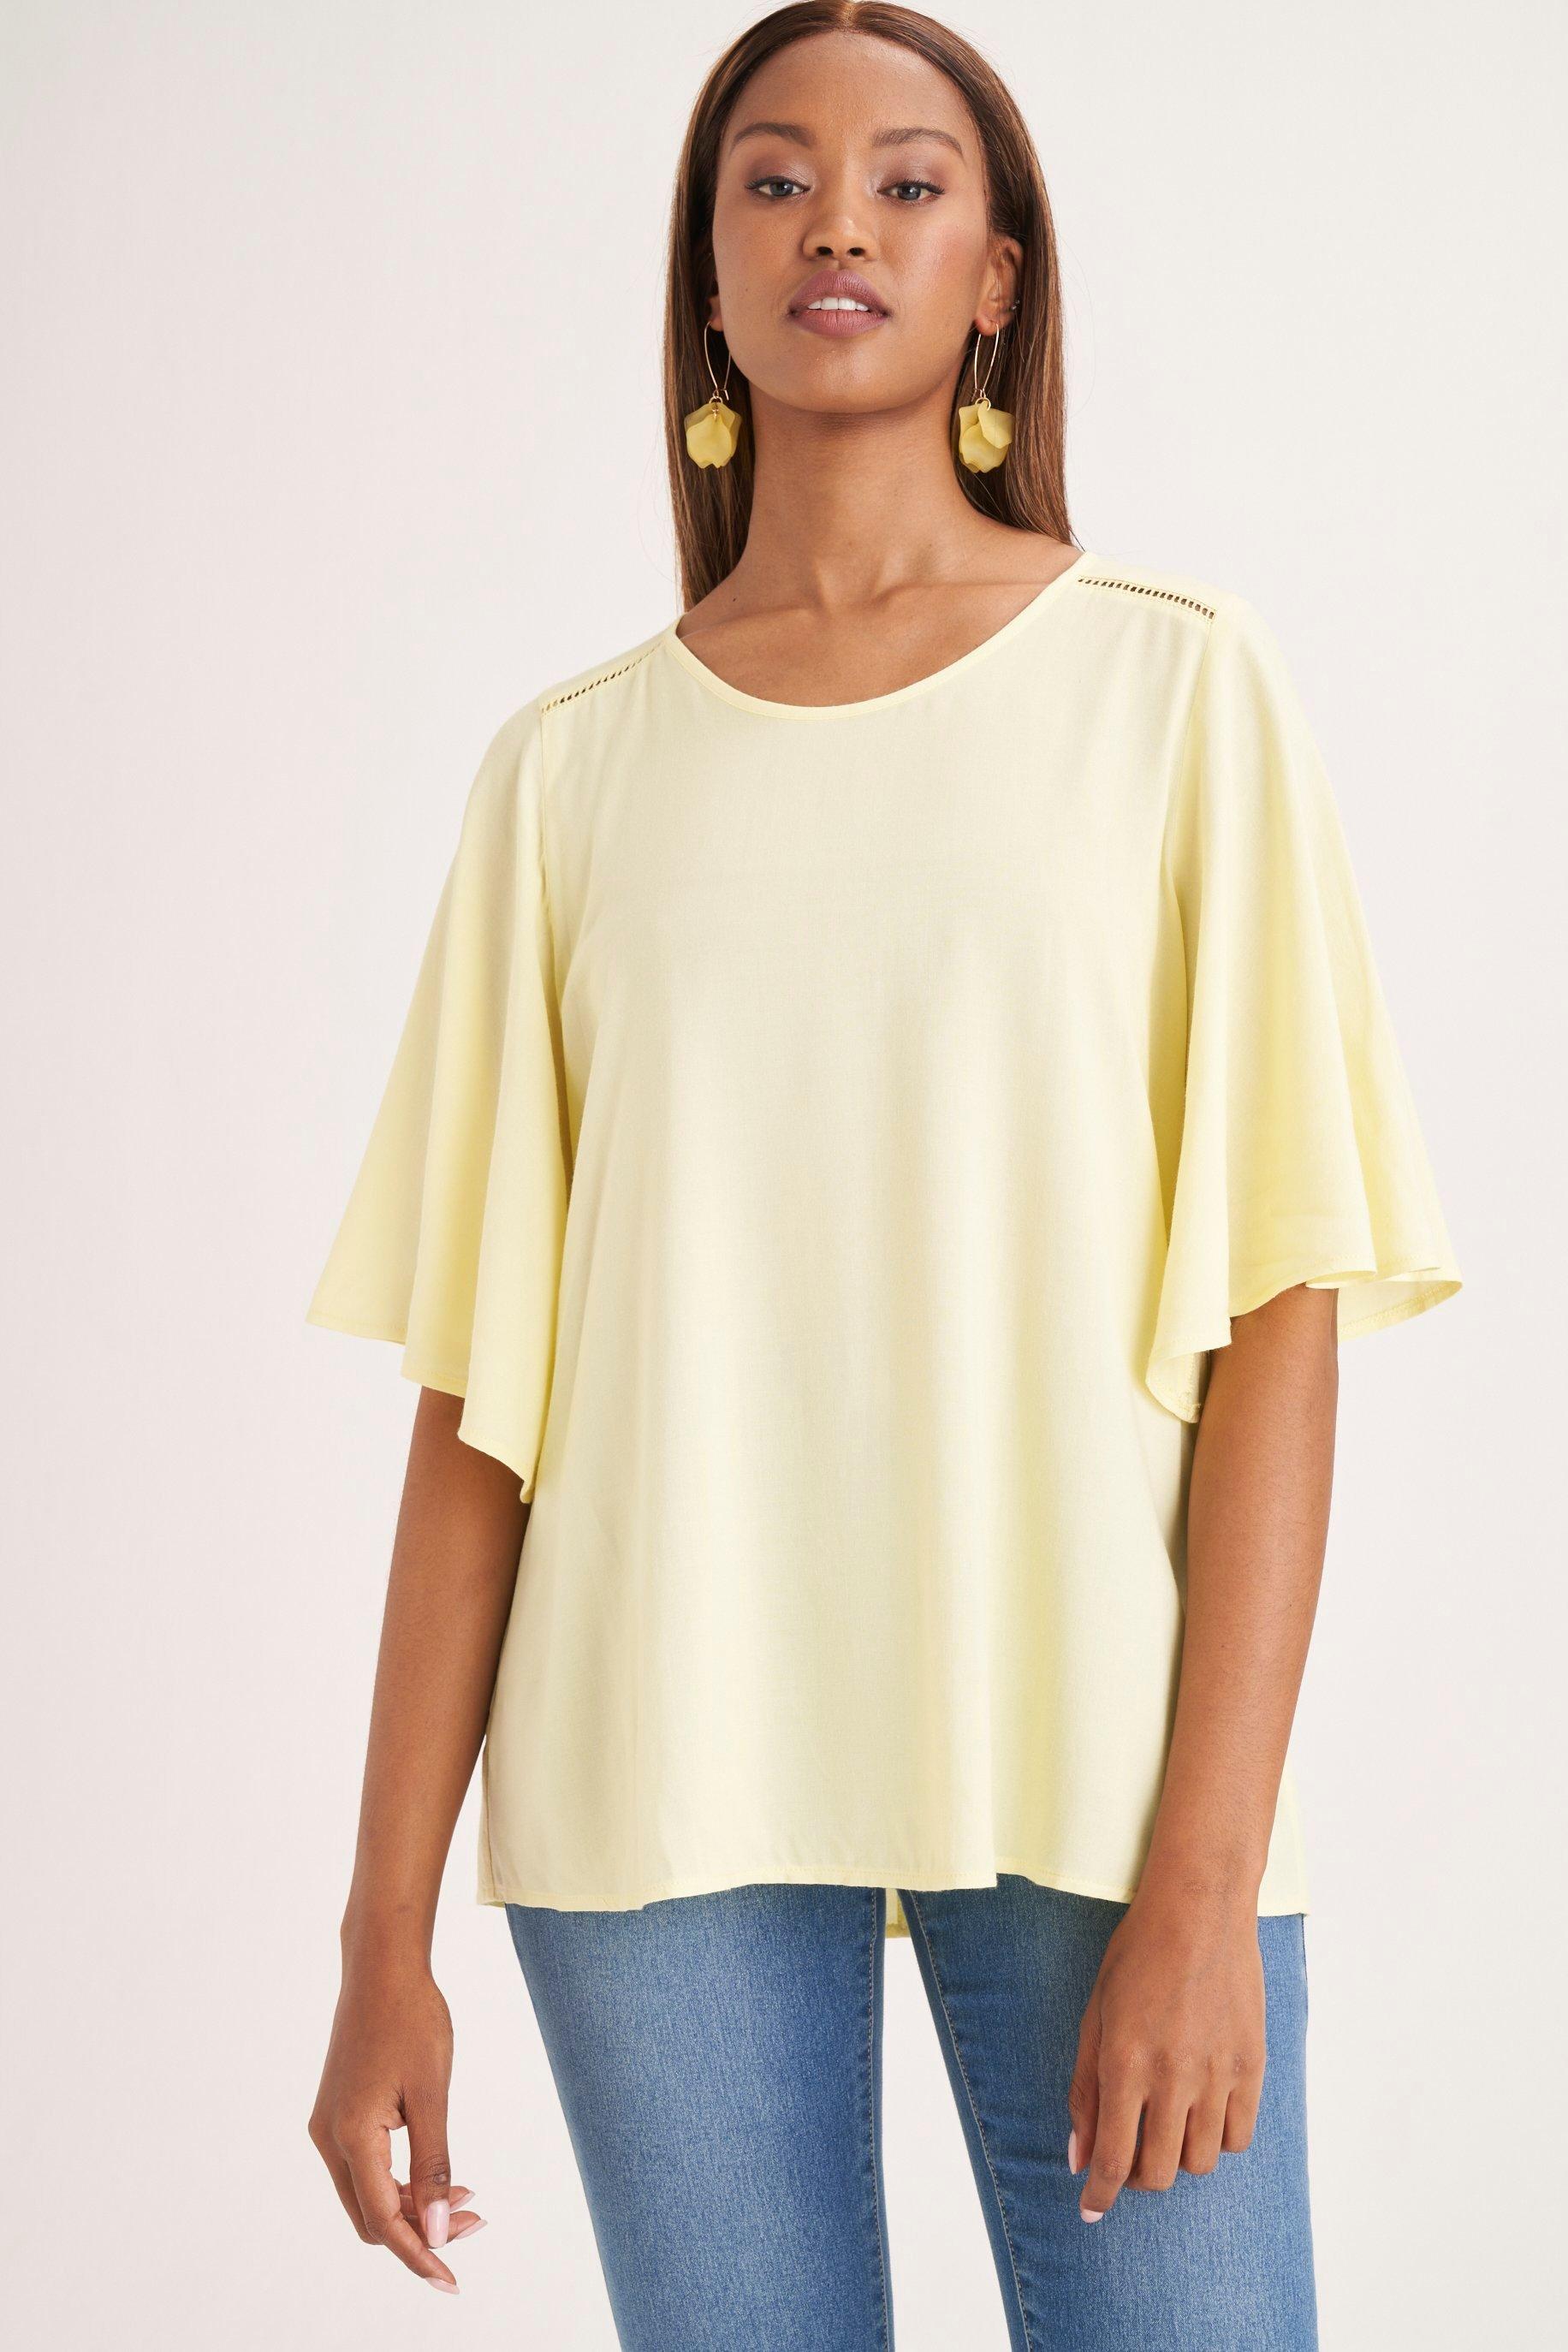 Fashion Tops | Shop Fashion Tops and Blouses Online now | MILADYS